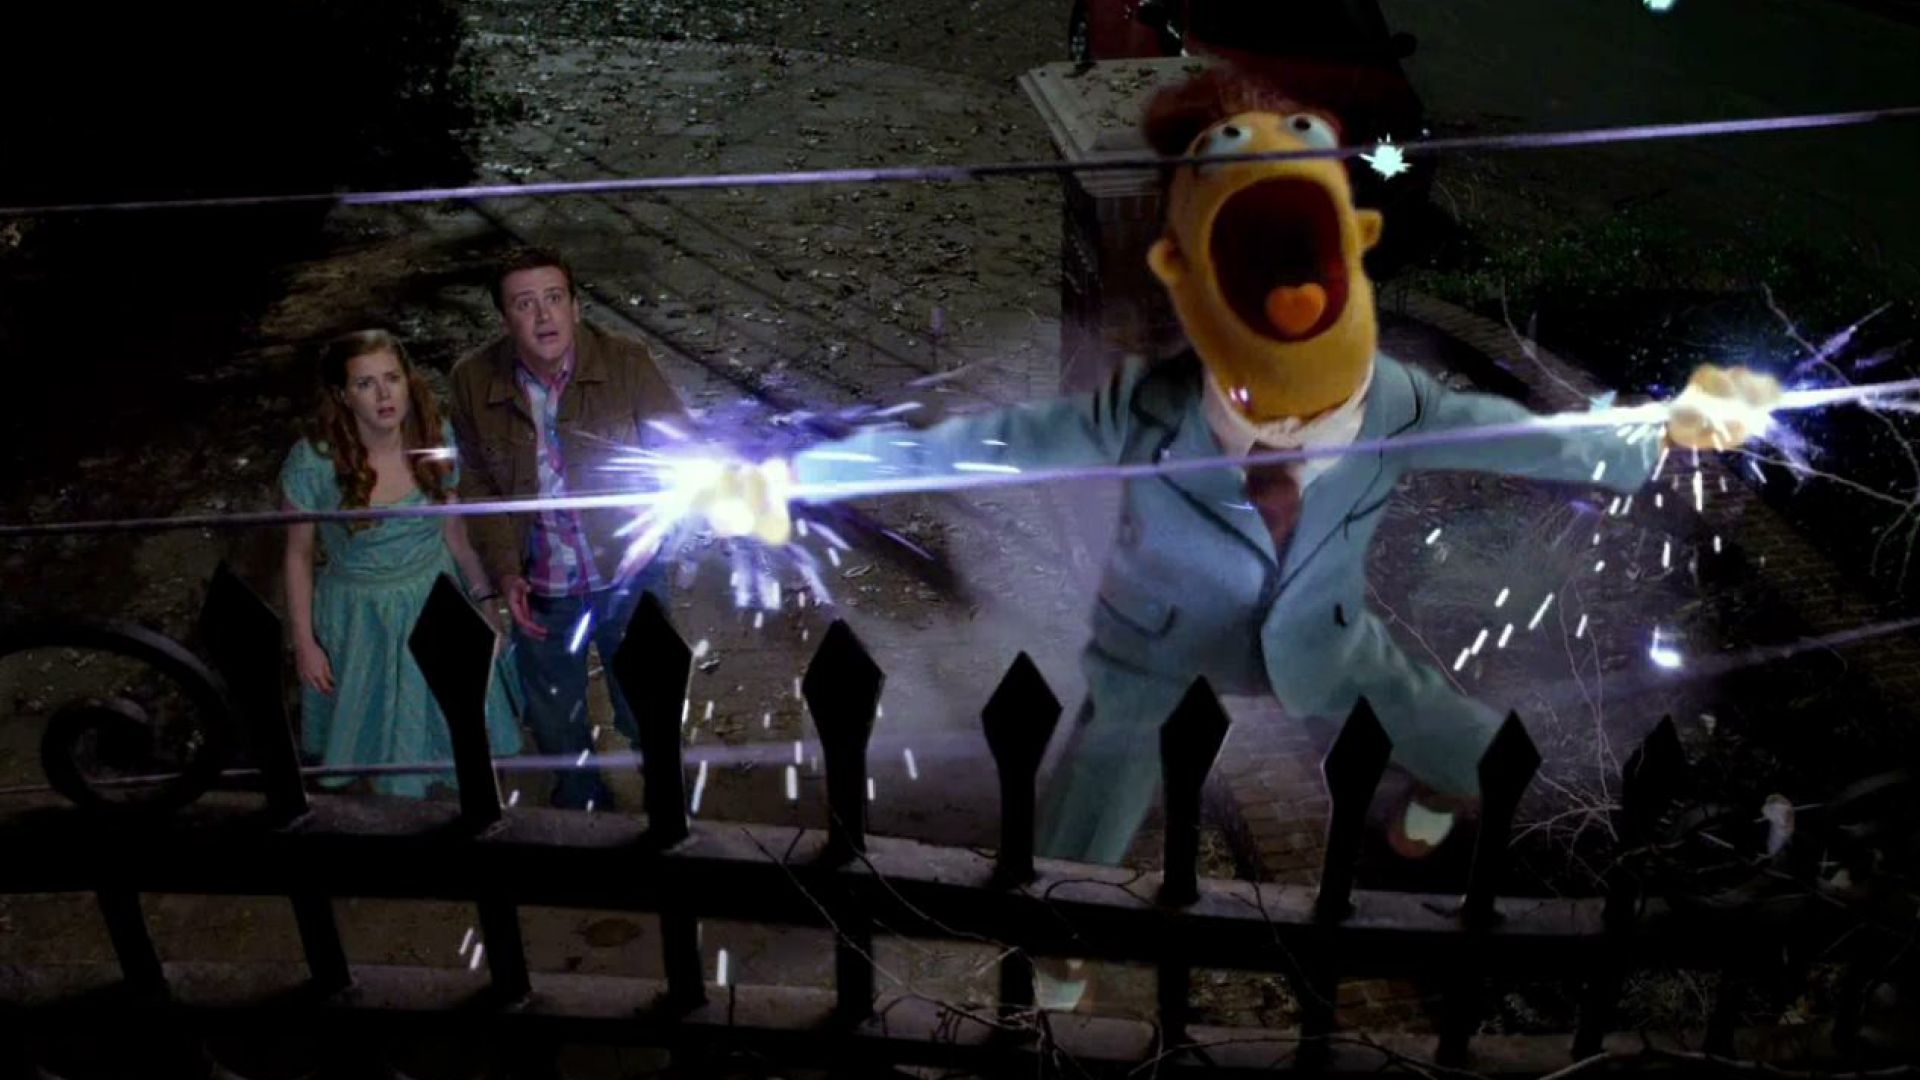 Jason Segel throws Walter onto an electric fence in The Muppets